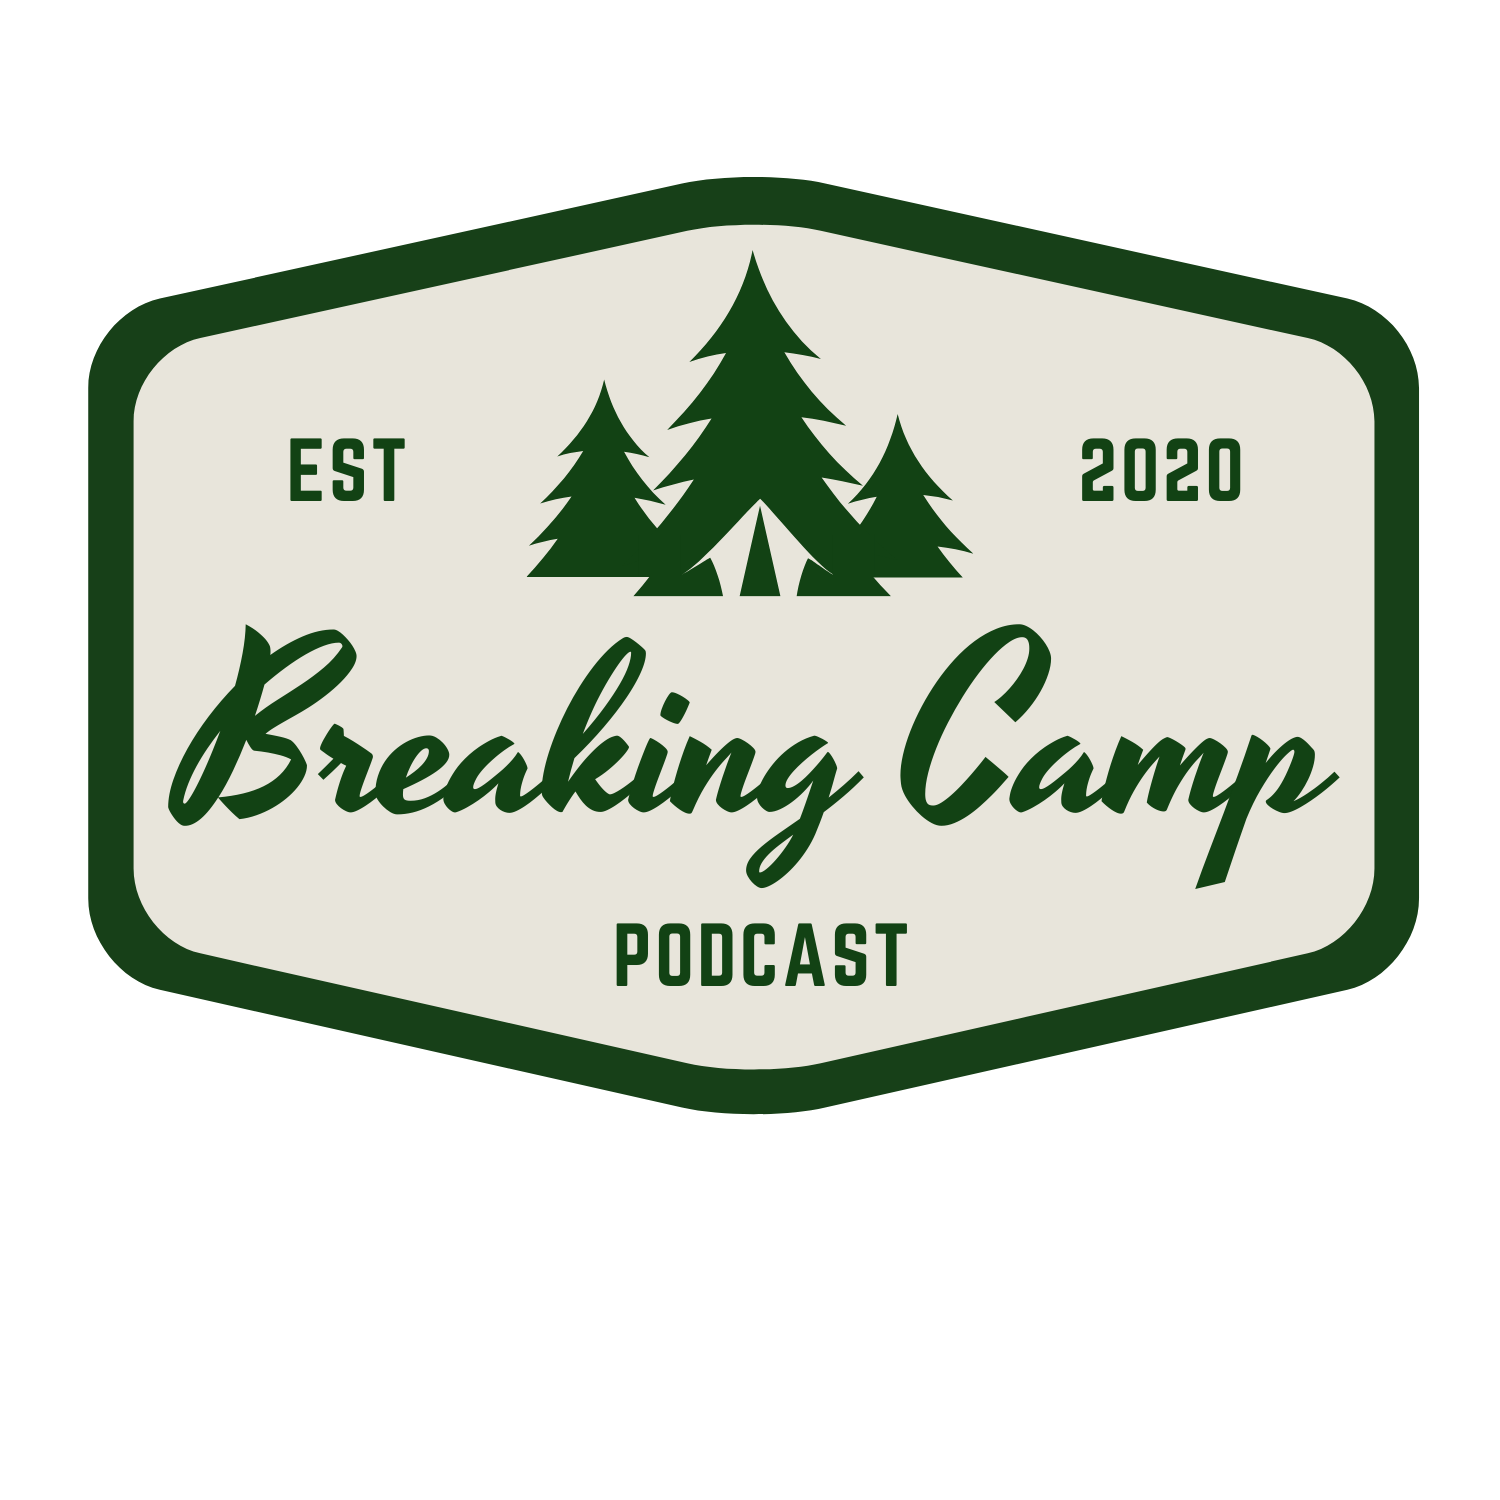 Breaking Camp Podcast